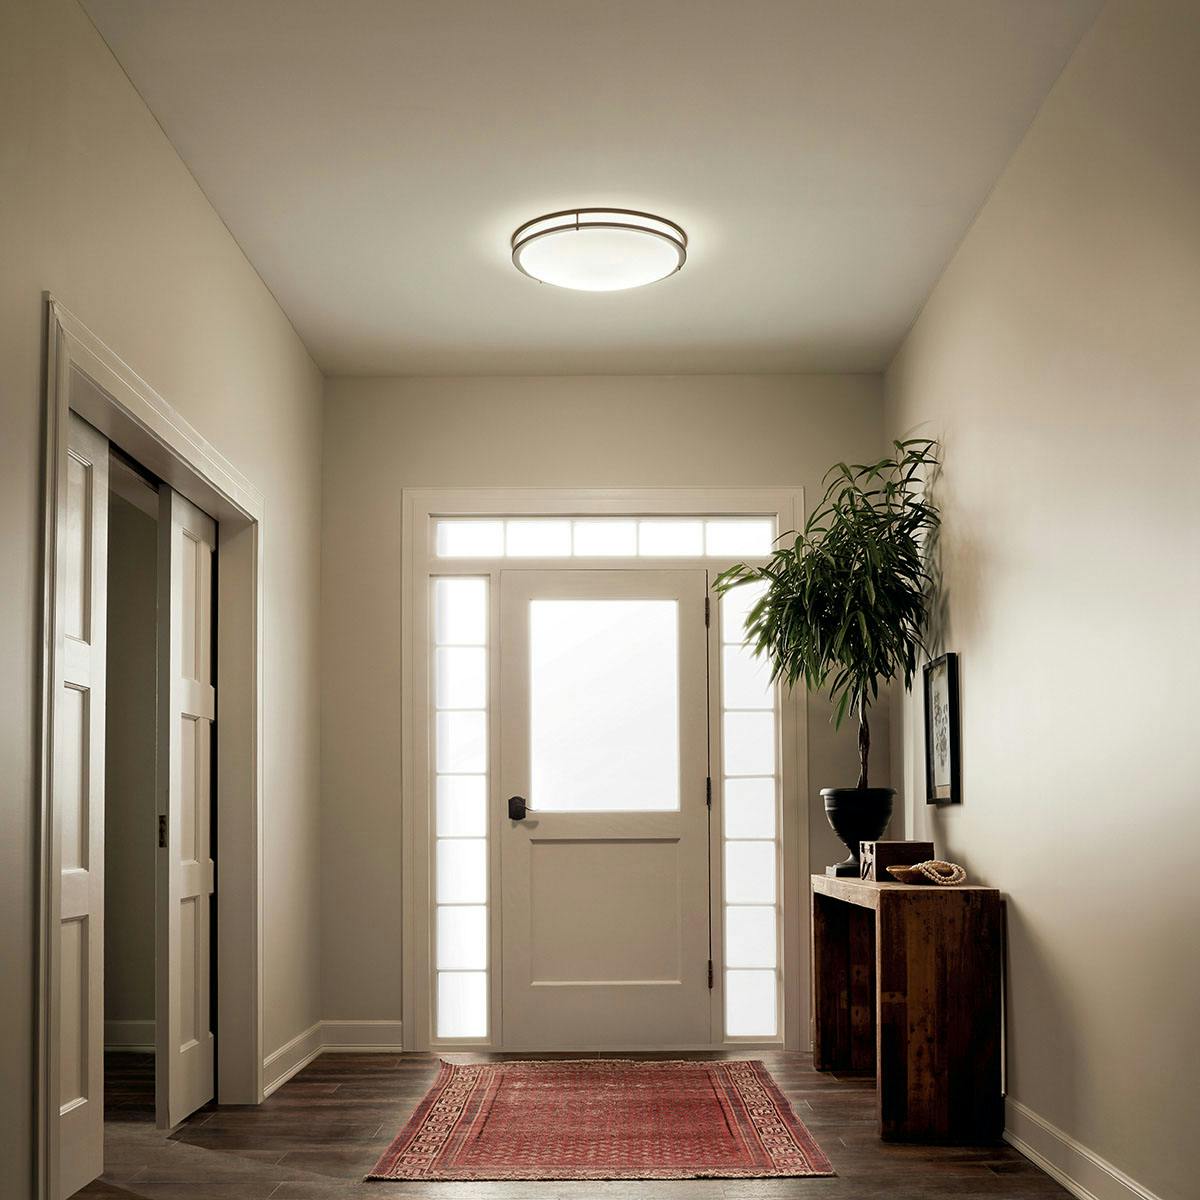 Day time Hallway image featuring Avon flush mount light 10788OZLED